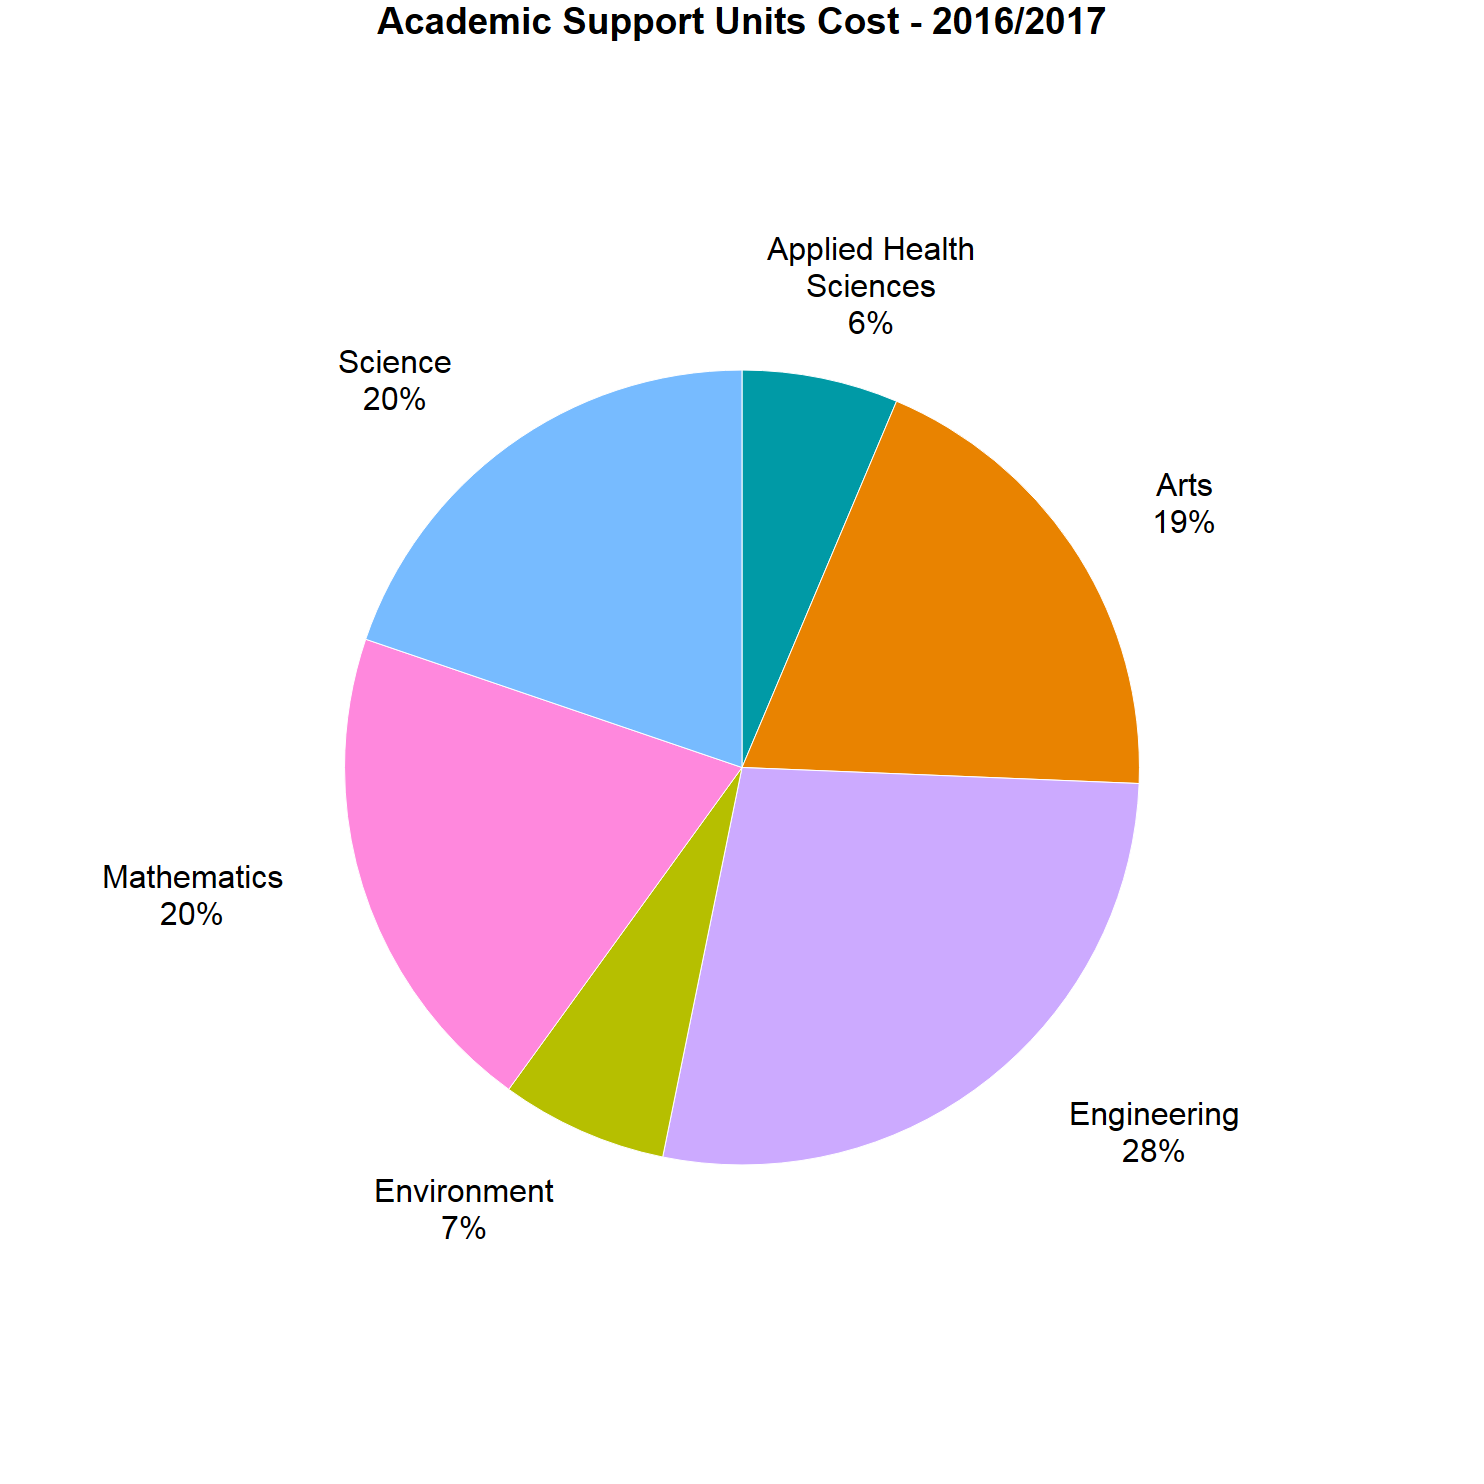 Academic Support Units Cost pie chart